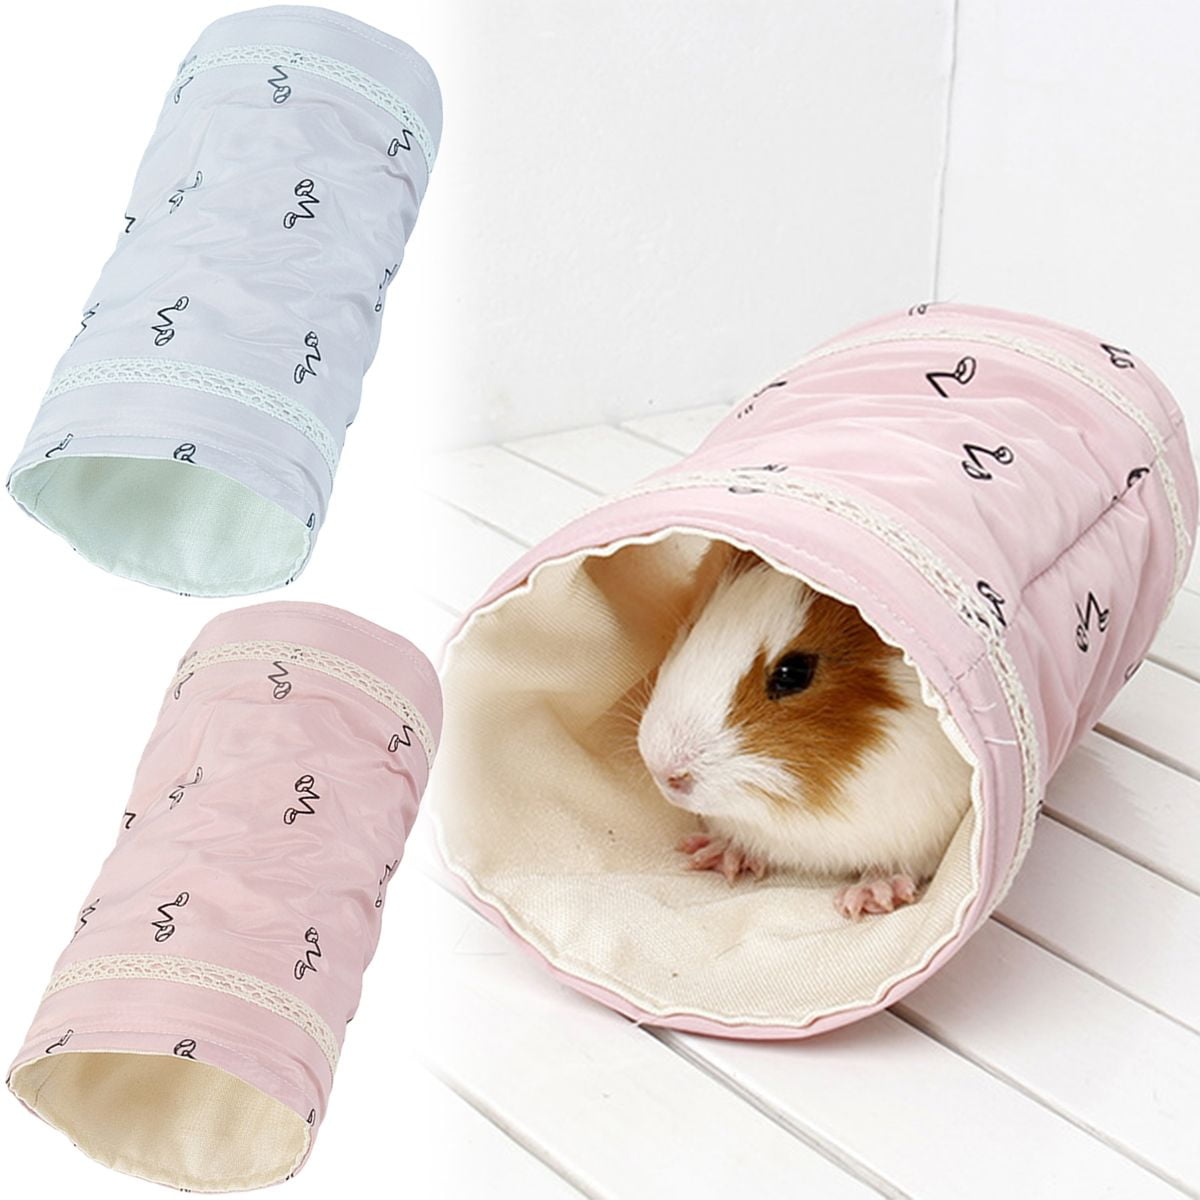 Handmade 3-Way Small Animal Tunnel Collapsible Pet Play Toy Tunnel Tube for Dwarf Rabbit Hamster Guinea Pig Toys Chinchilla Sugar Glider Hedgehog Hideout Cave 